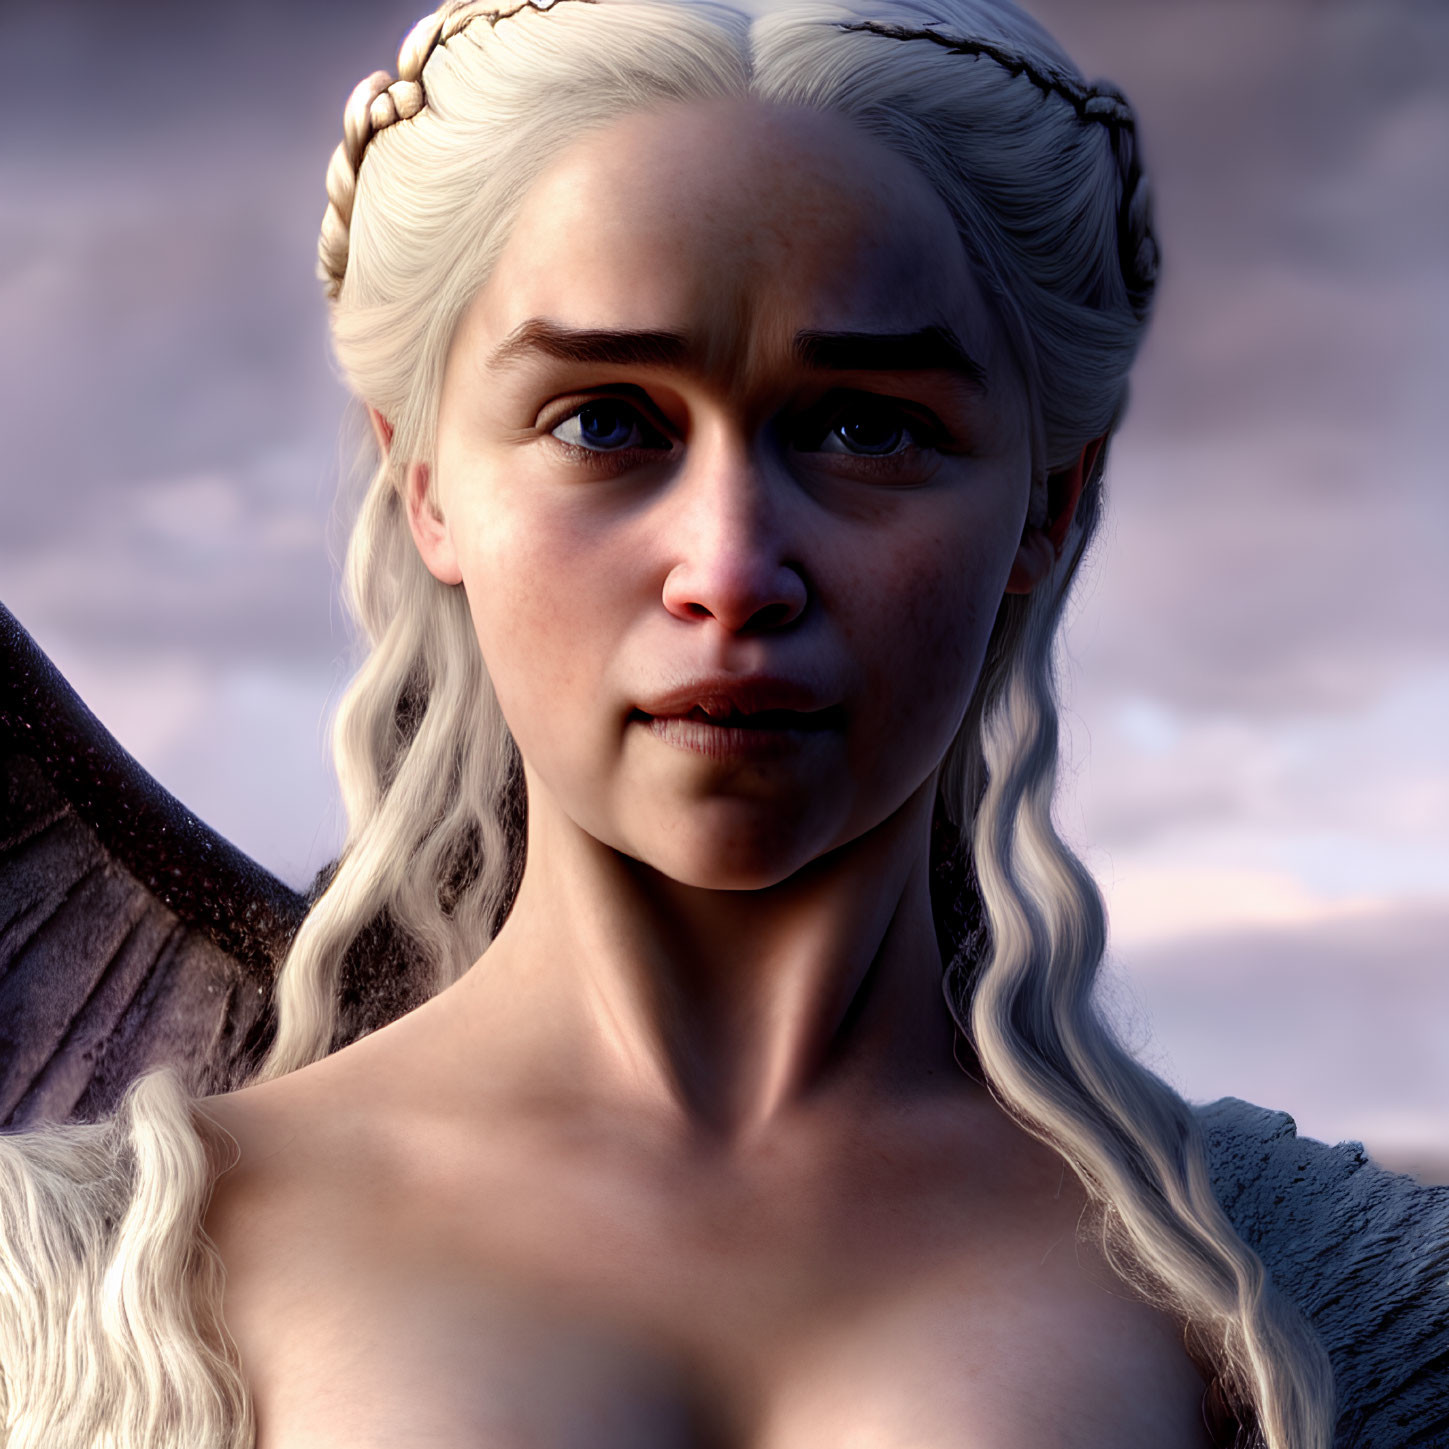 Digital portrait of woman with pale skin, white-blonde hair in braids, and dragon wings